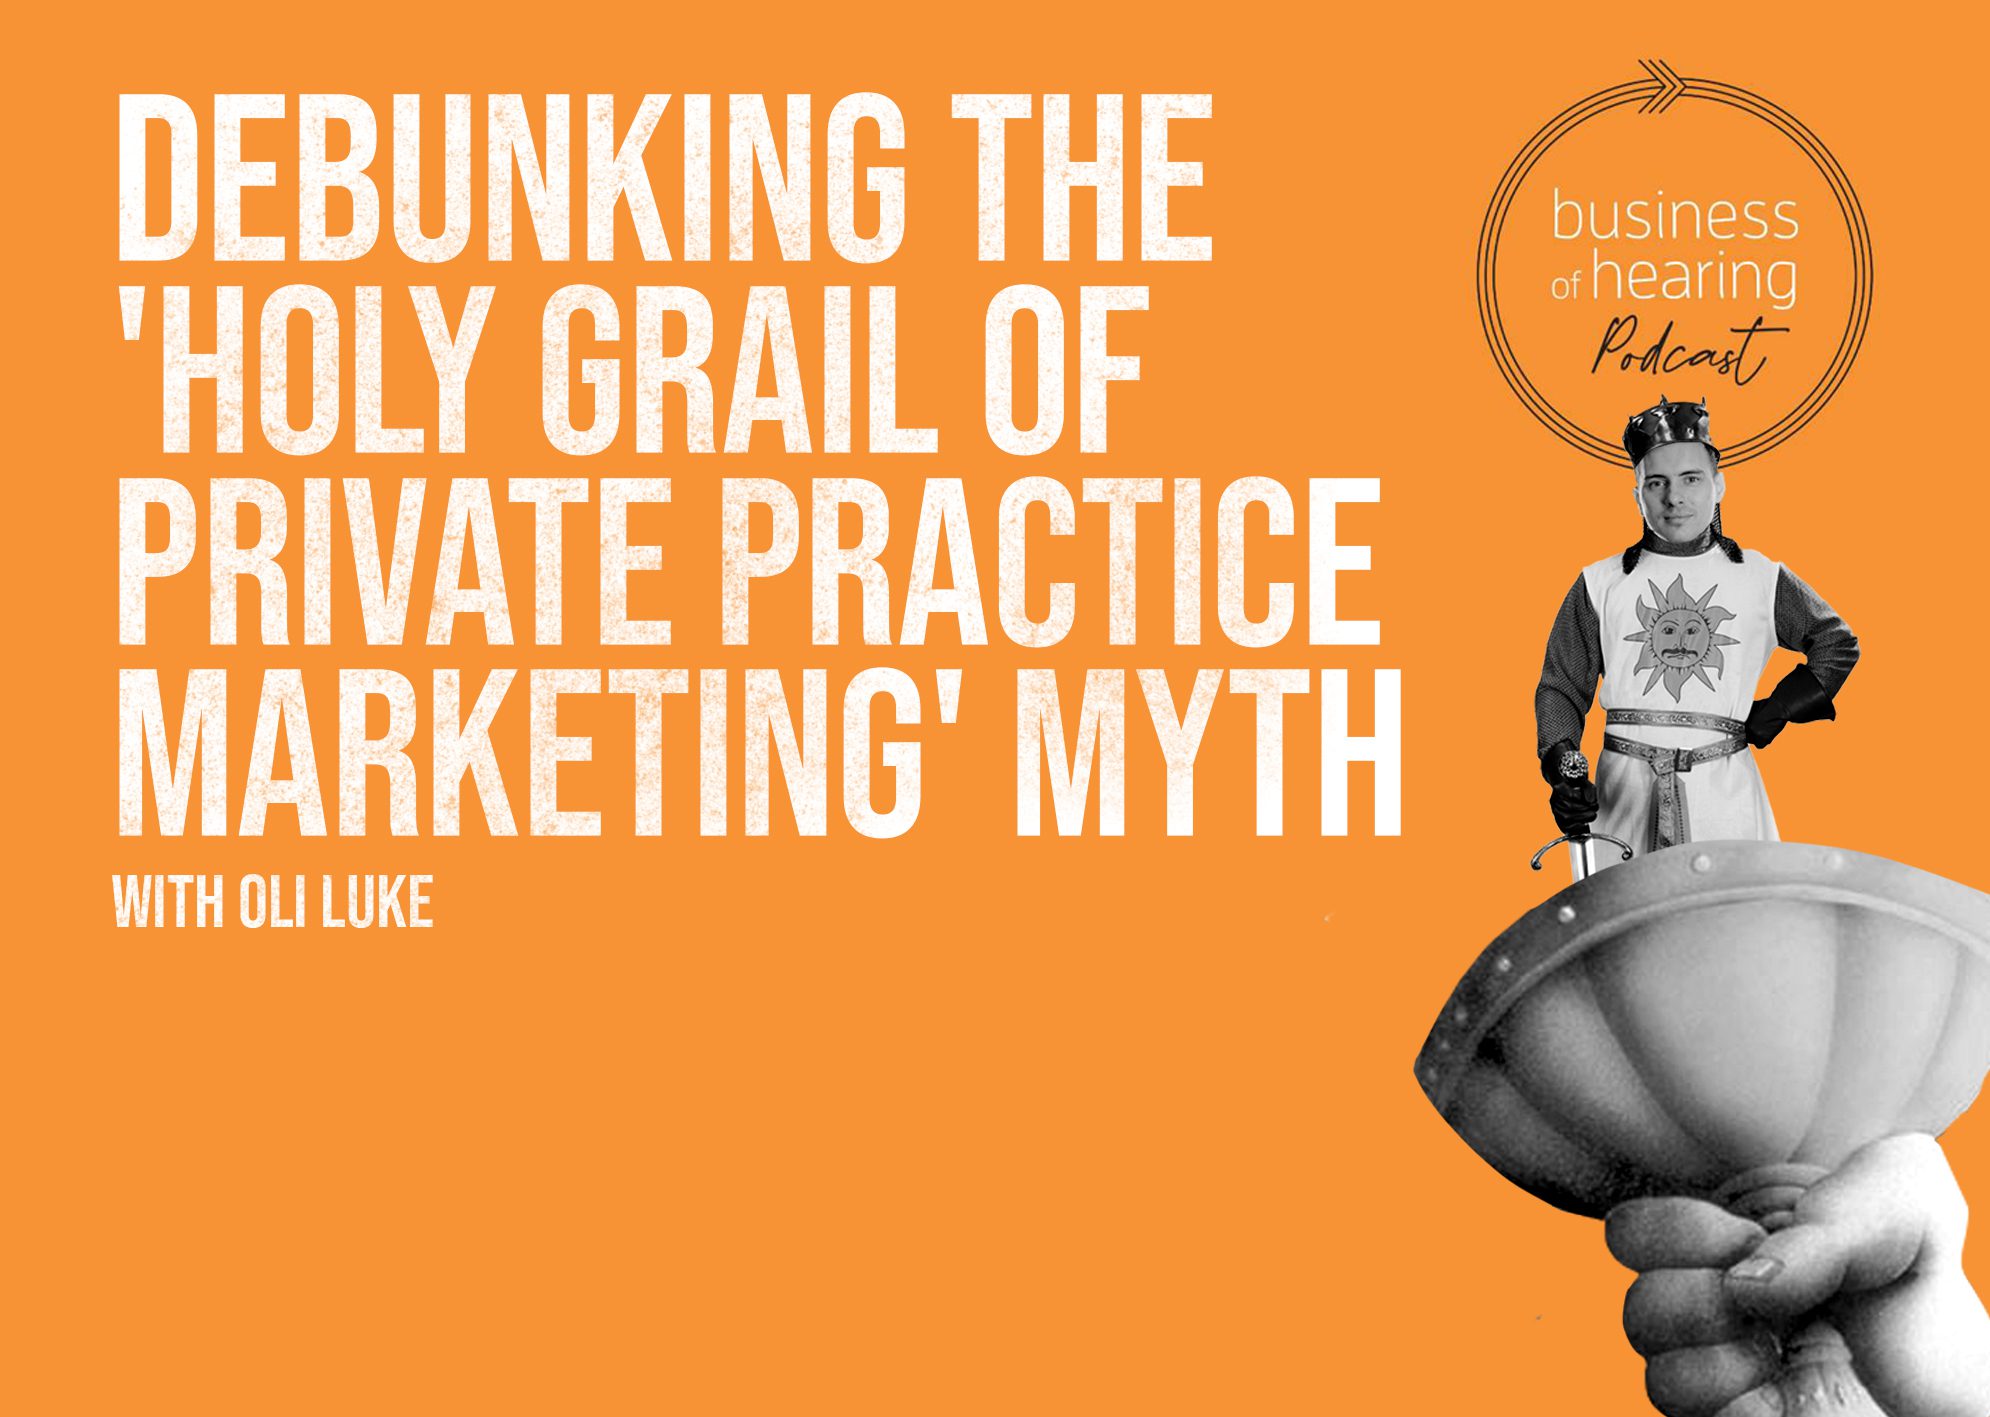 Debunking the holy grail of marketing myth podcast image